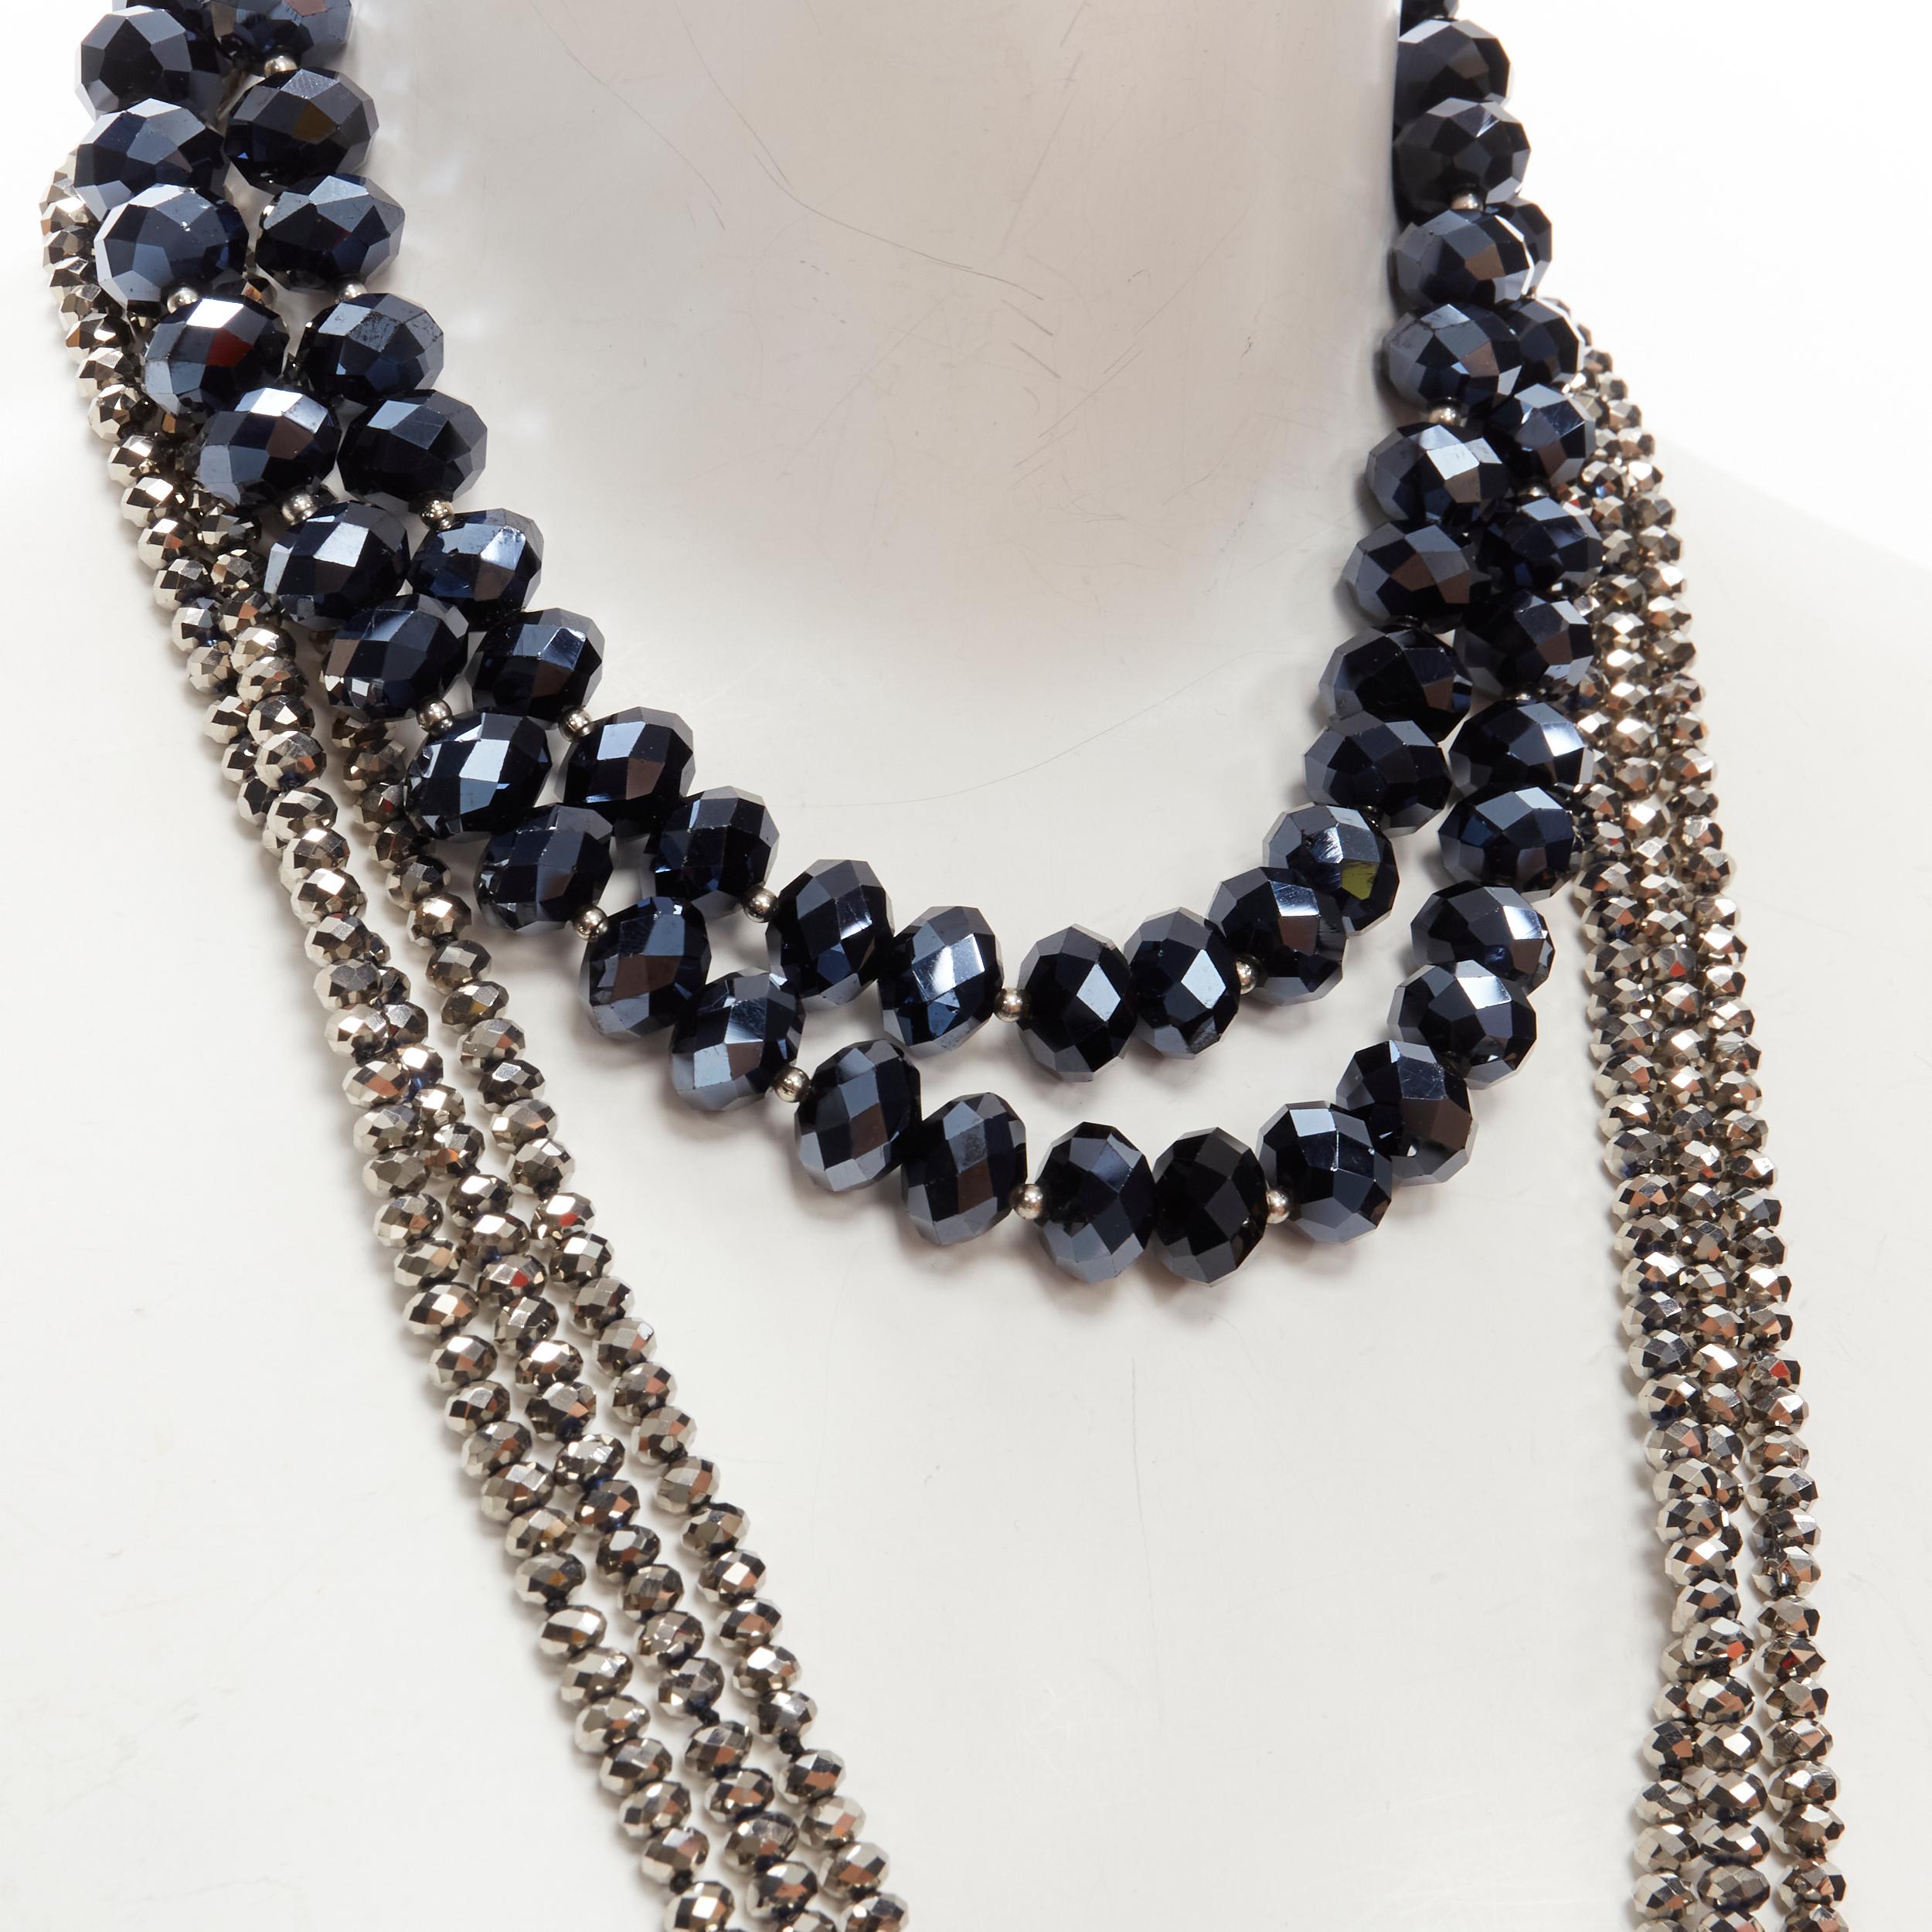 KENNETH JAY LANE silver geometric beads blue big beads double necklace set
Reference: ANWU/A00280
Brand: Kenneth Jay Lane
Material: Metal
Color: Silver, Blue
Closure: Hook & Bar
Extra Details: Hook and bar closure and mini brand logo metal